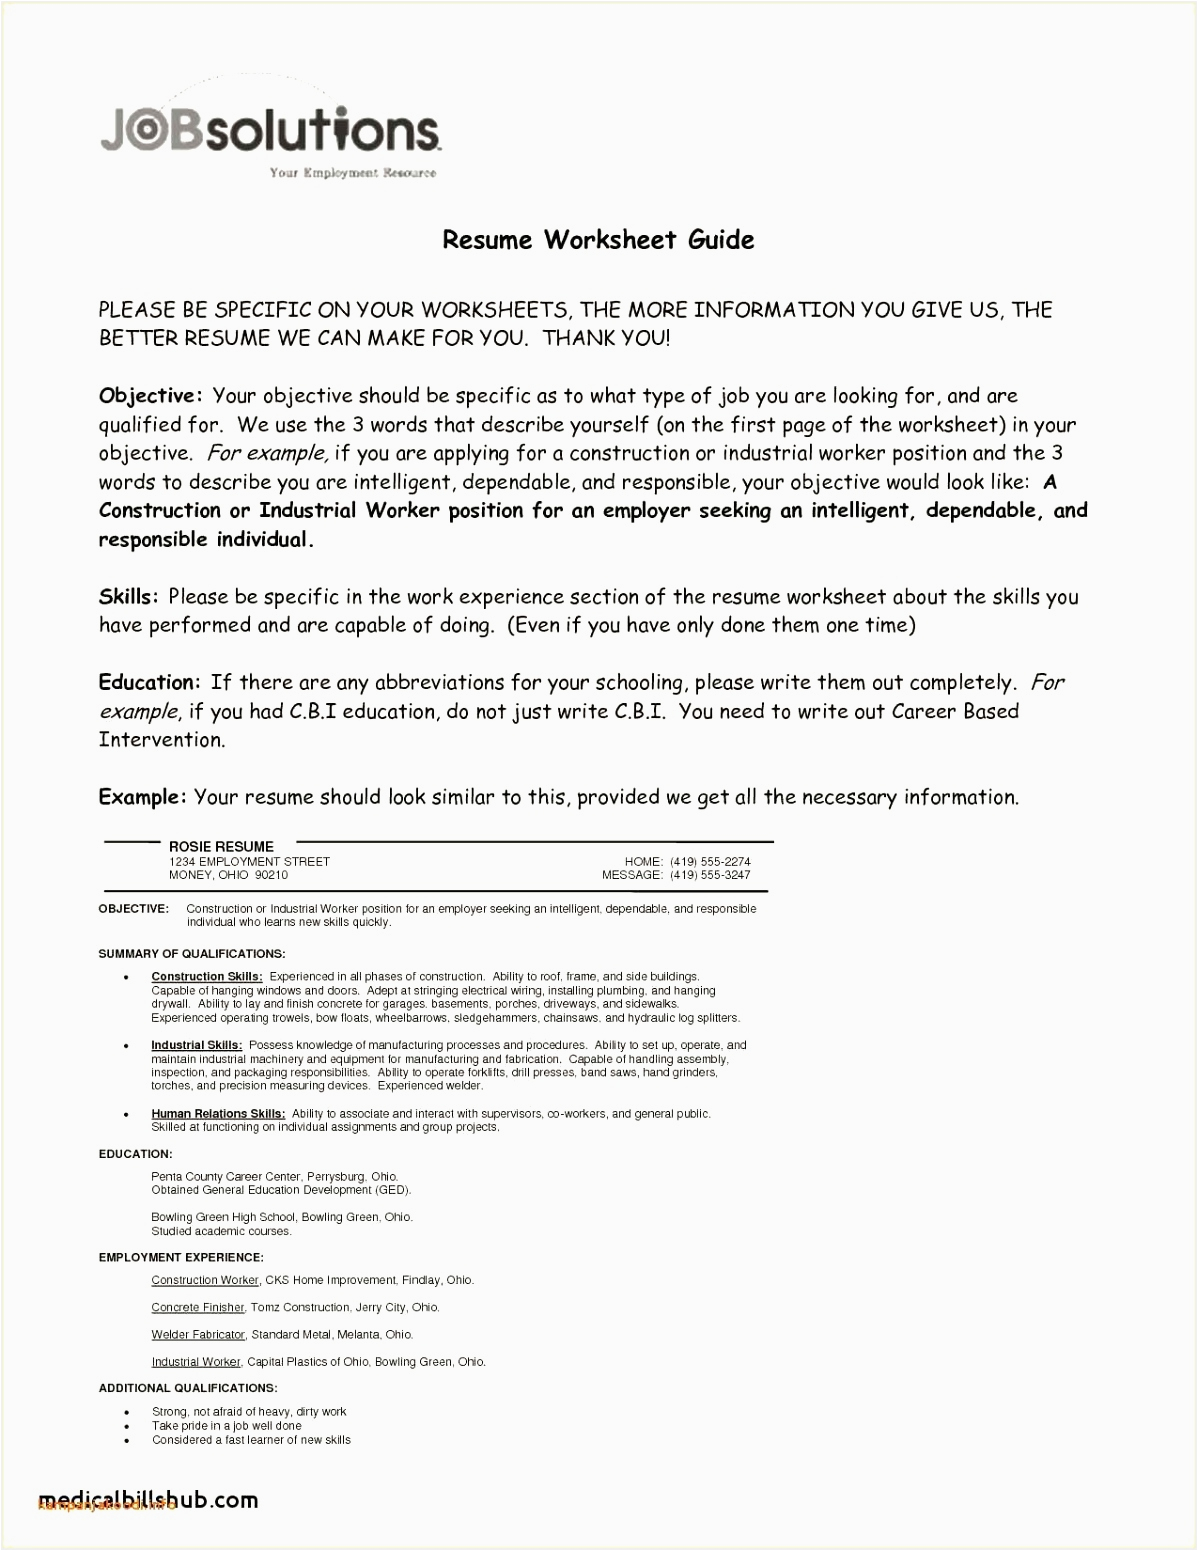 Sample Resume Objective for College Application 10 Objective for A Job Resume Wqmsha